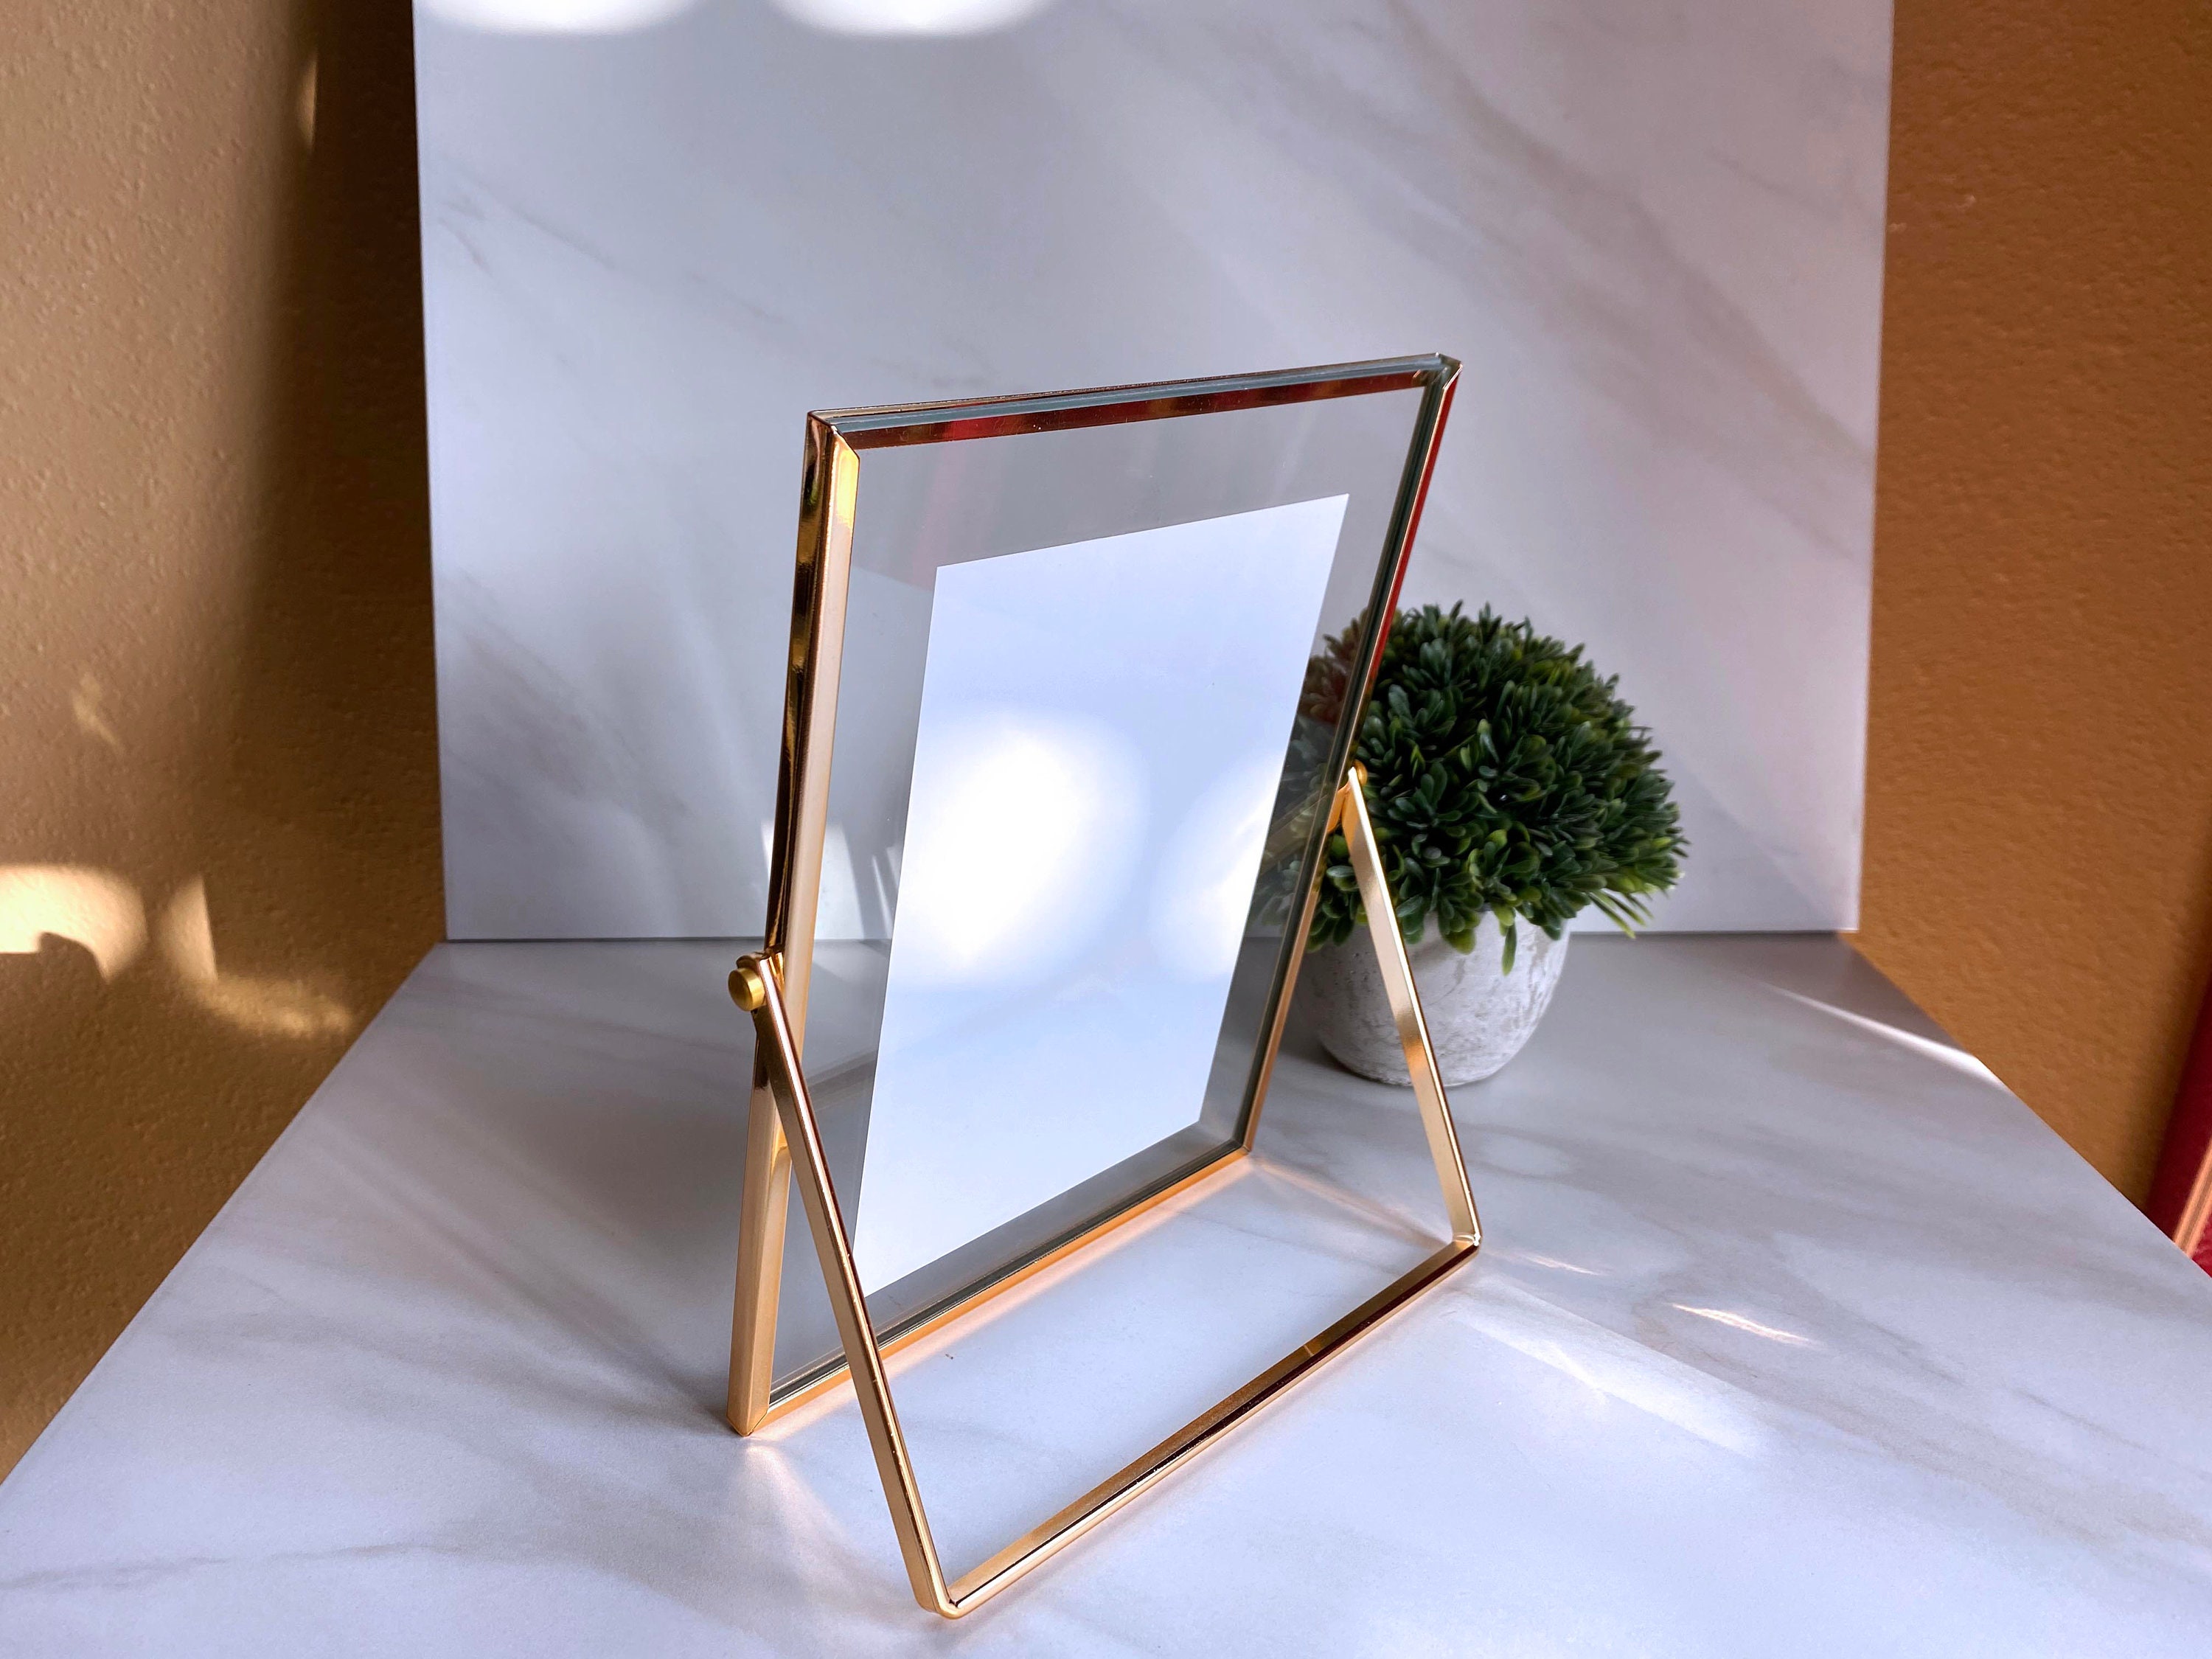 5 x 7 Picture Frames 6-Pack – Floating Frame Set for Table Numbers, Wedding Signs, Photos, or Table Decor by Great Northern Party - Gold